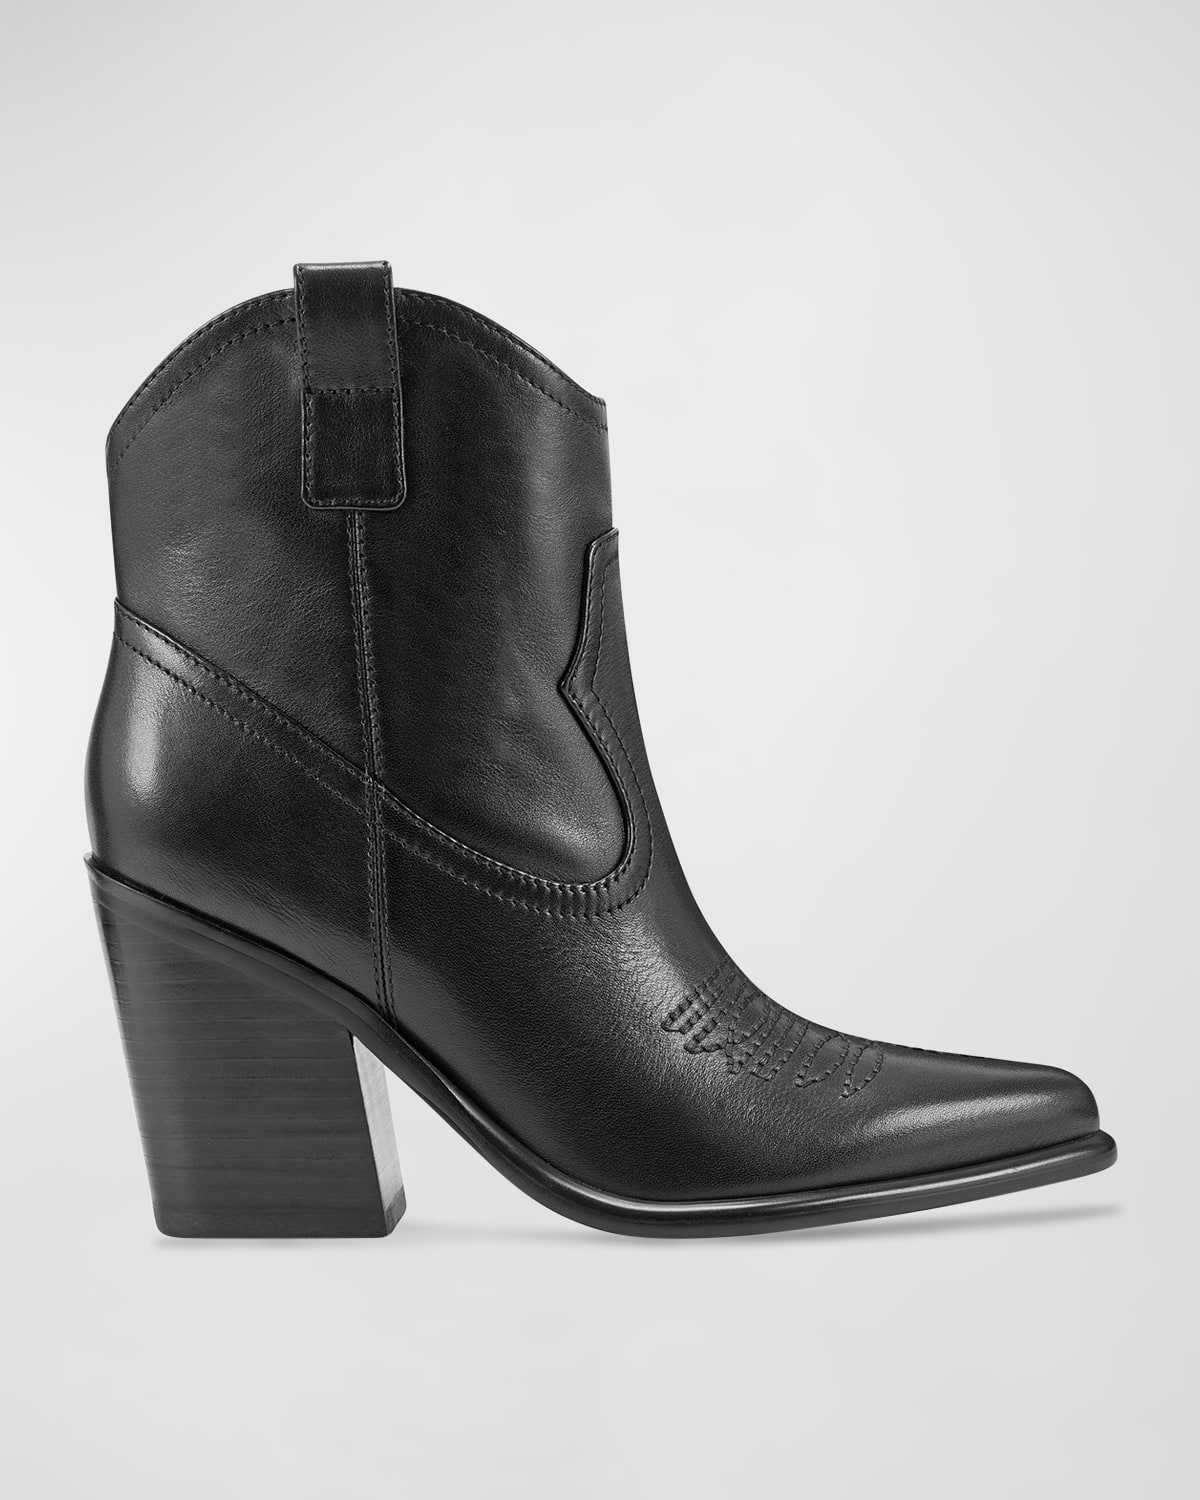 MARC FISHER LTD LEATHER WESTERN ANKLE BOOTIES